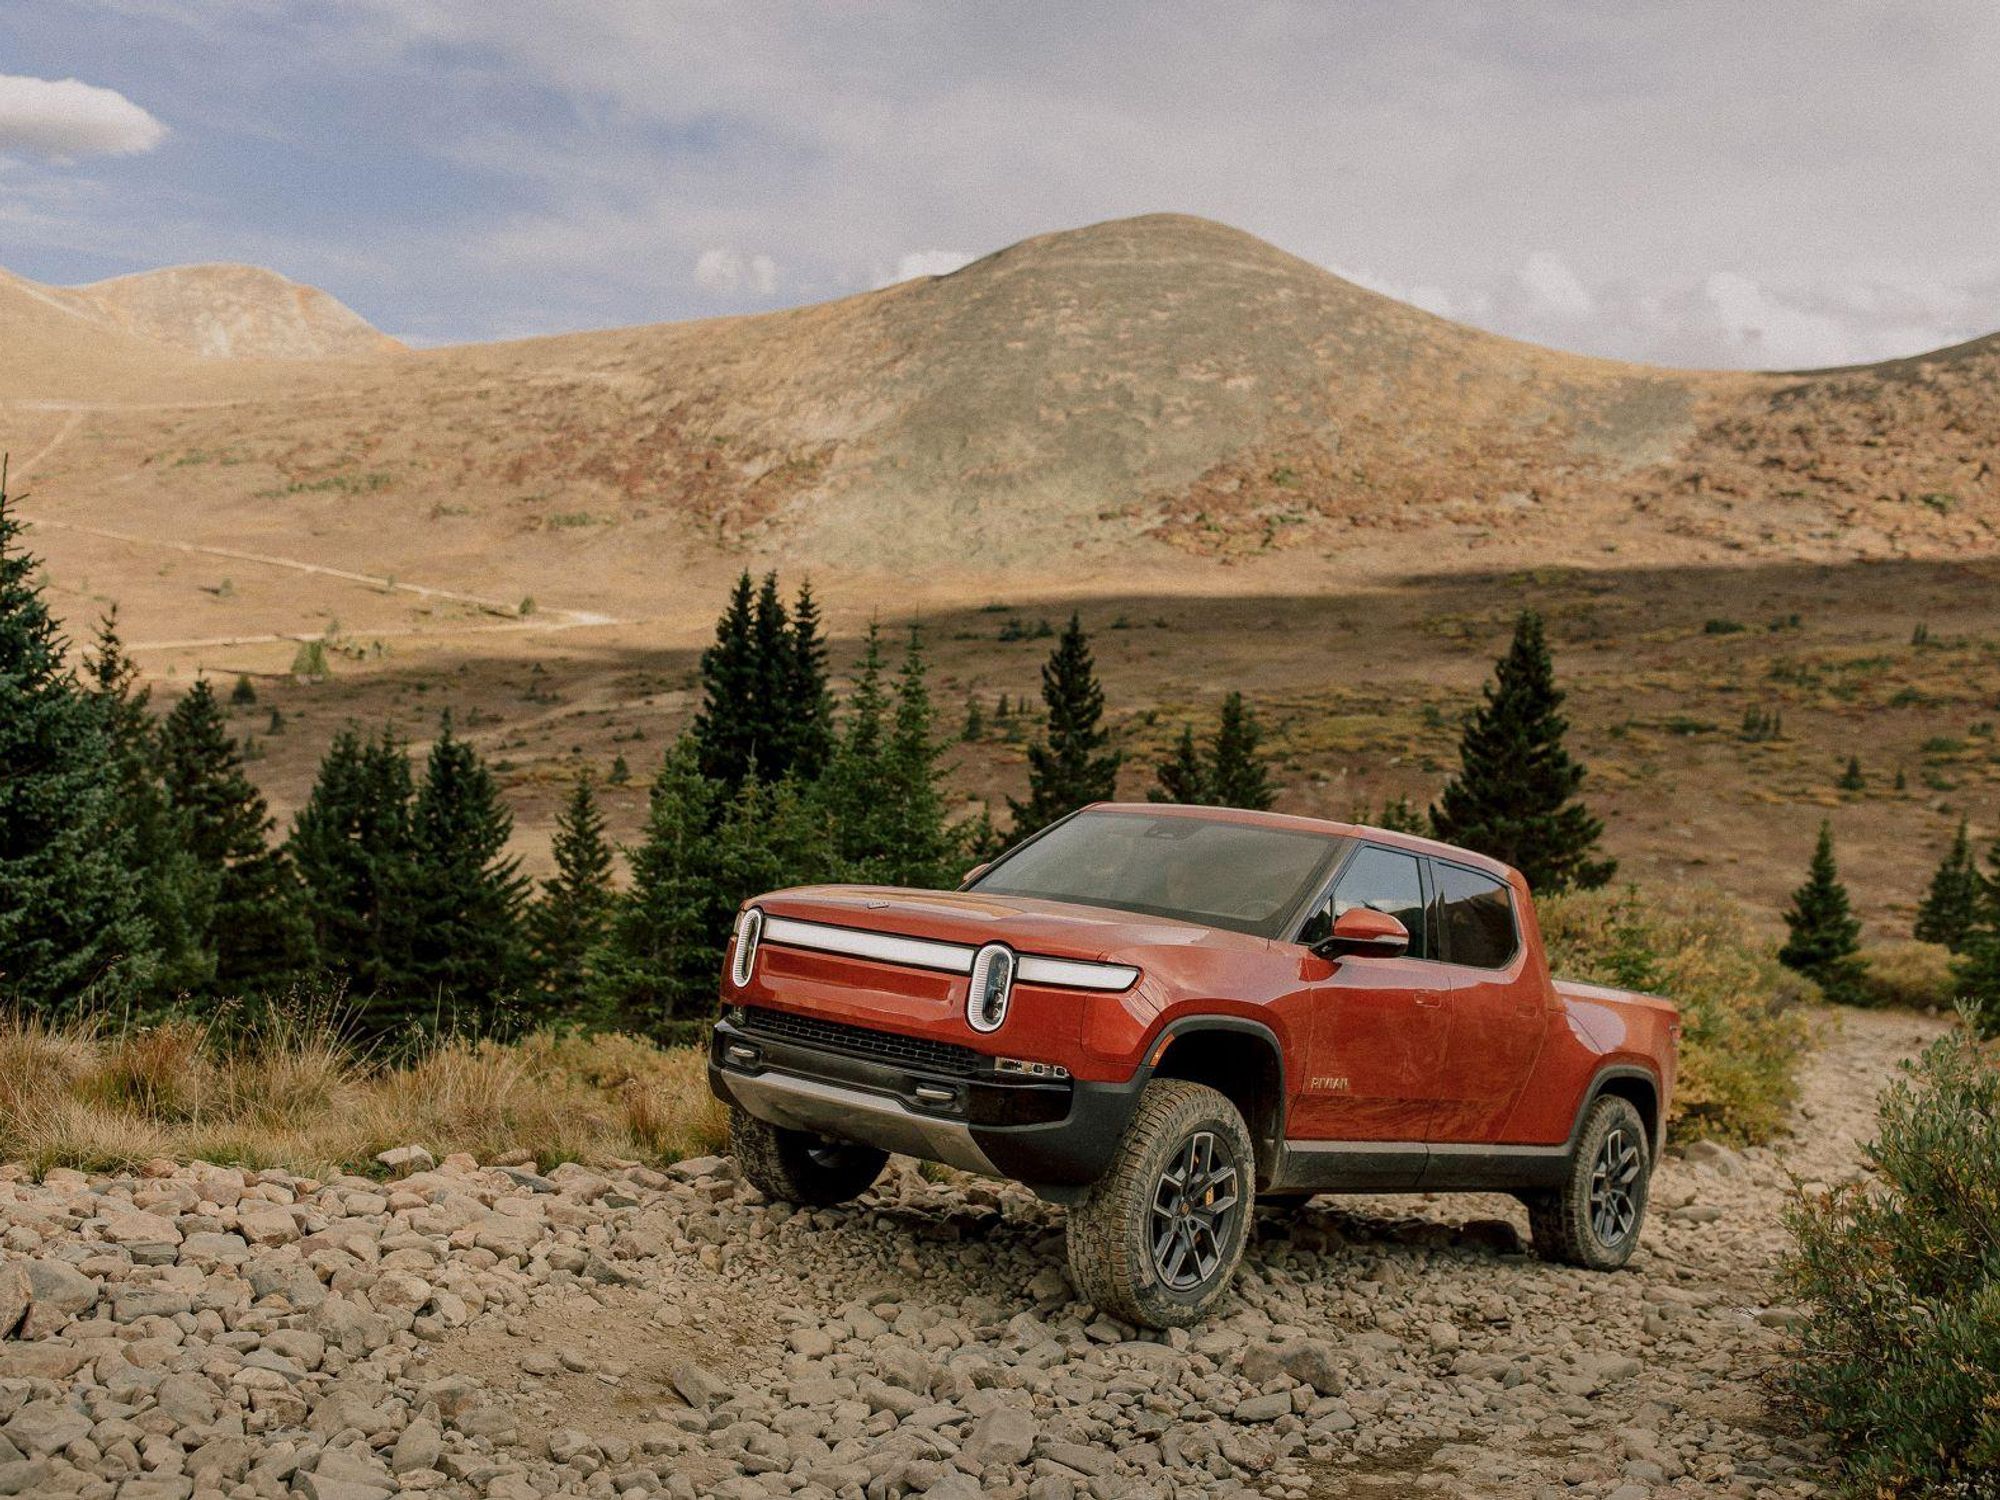 Consider All Options Carefully Before Deciding if You Should Keep or Cancel Your Rivian R1T Vehicle